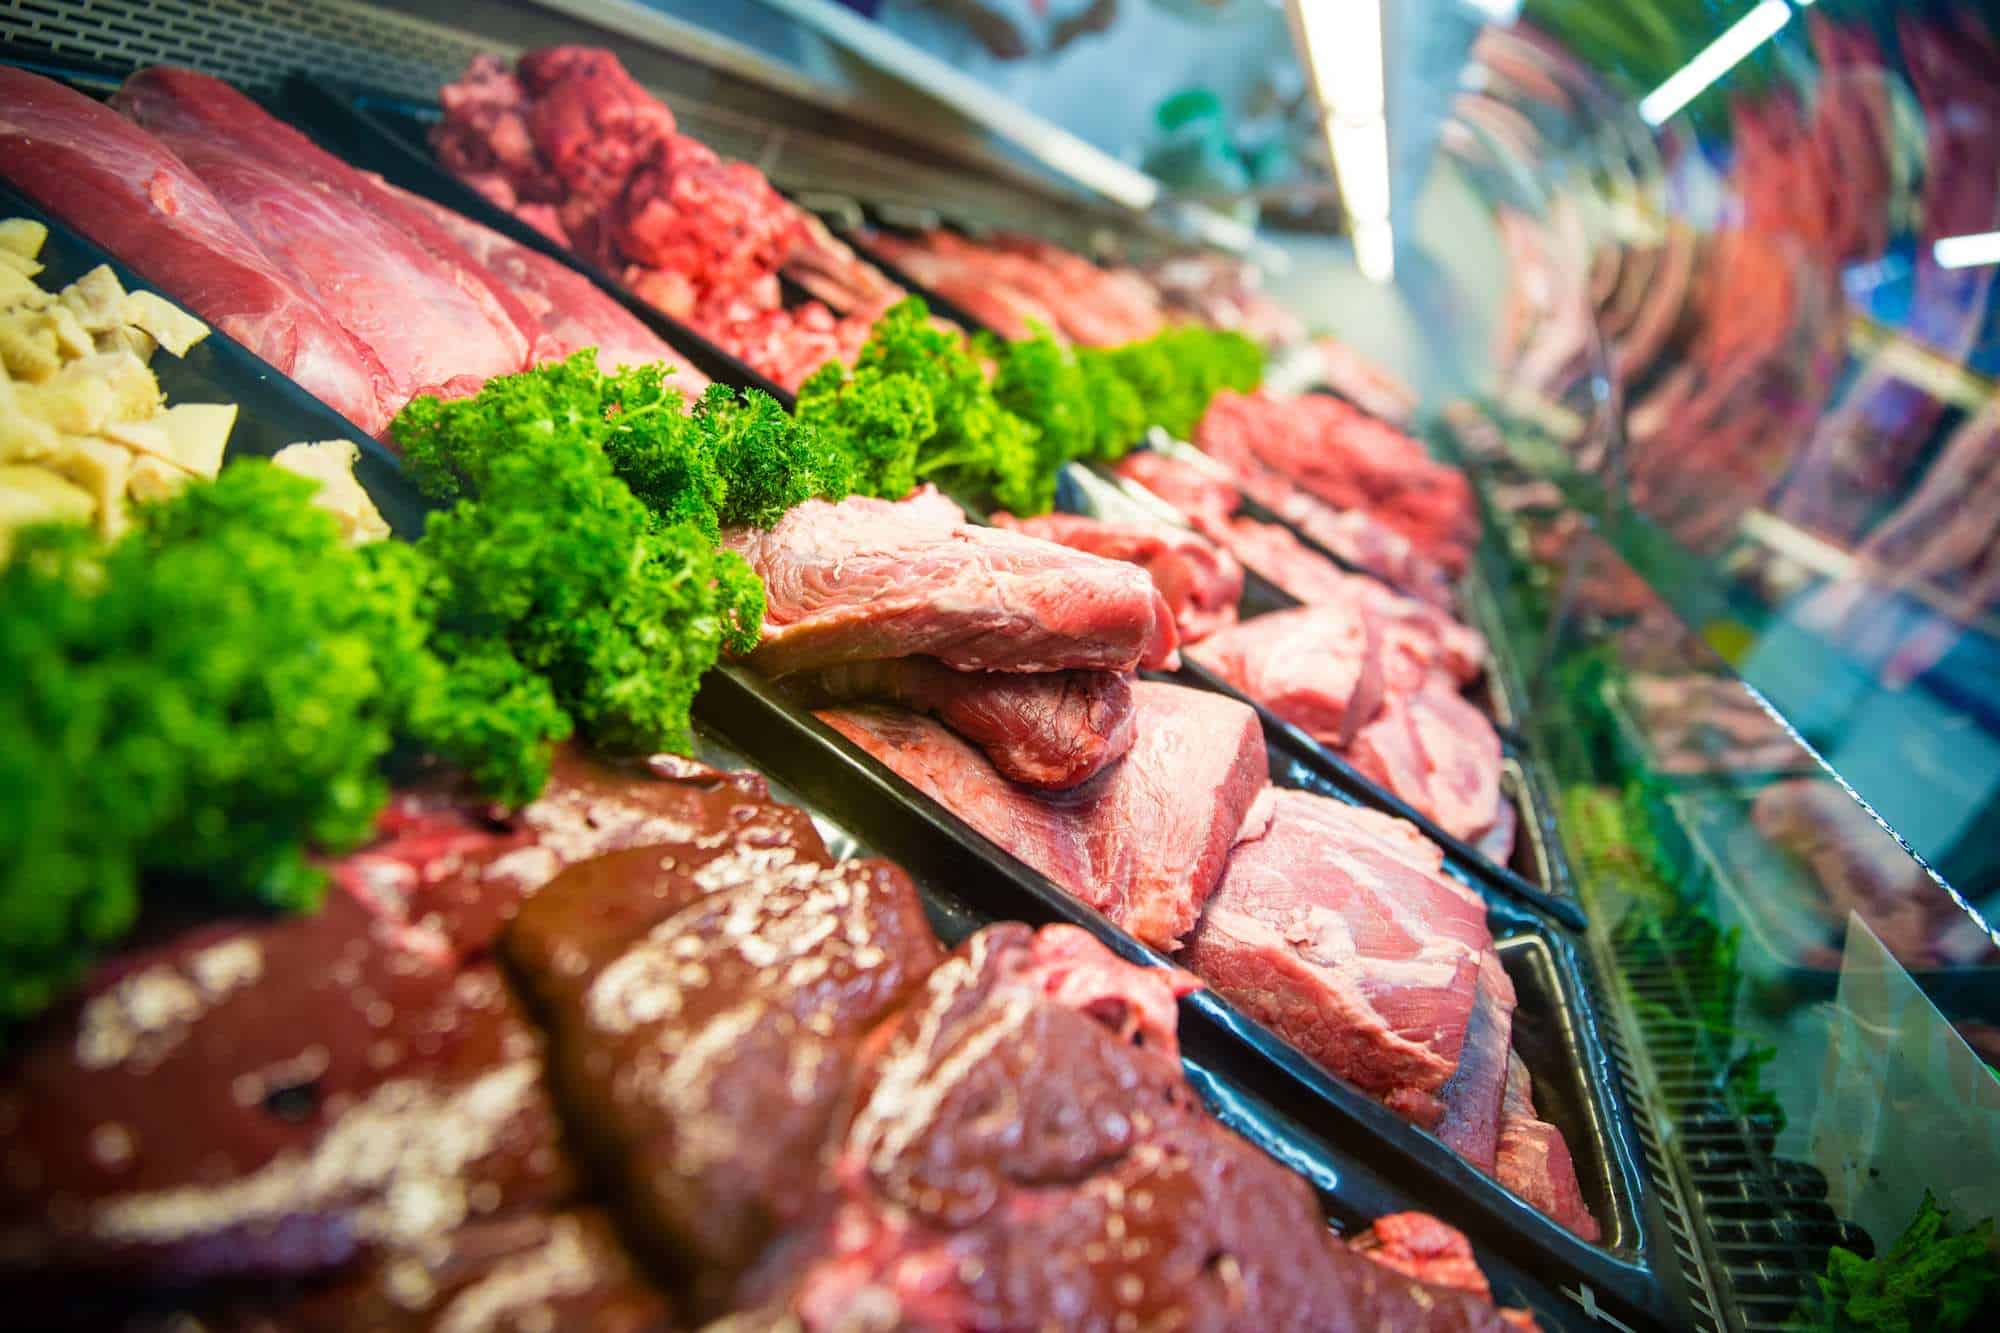 A glass butcher showcase of red meat in a supermarket, with each type of cut separated by parsley.